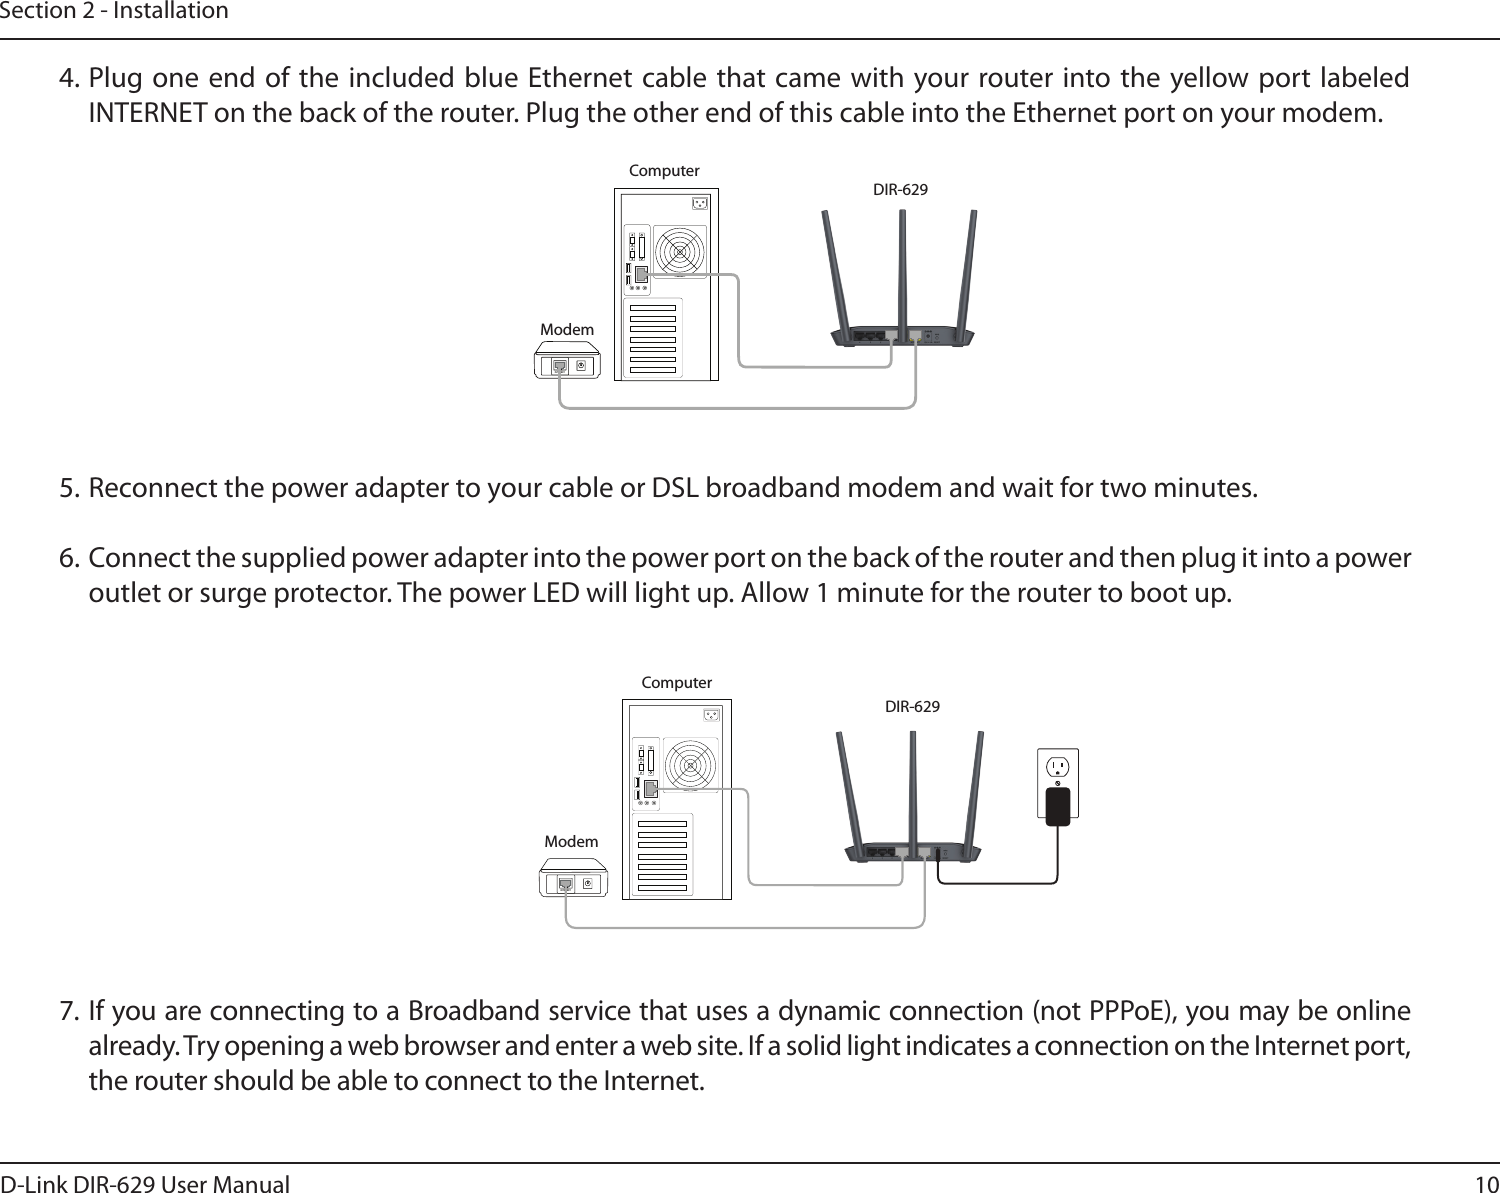 10D-Link DIR-629 User ManualSection 2 - InstallationINTERNET4. Plug one end of the included blue Ethernet cable that came with your router into the yellow port labeled 6.  Connect the supplied power adapter into the power port on the back of the router and then plug it into a power outlet or surge protector. The power LED will light up. Allow 1 minute for the router to boot up. already. Try opening a web browser and enter a web site. If a solid light indicates a connection on the Internet port, the router should be able to connect to the Internet. INTERNETModemModemComputerComputer